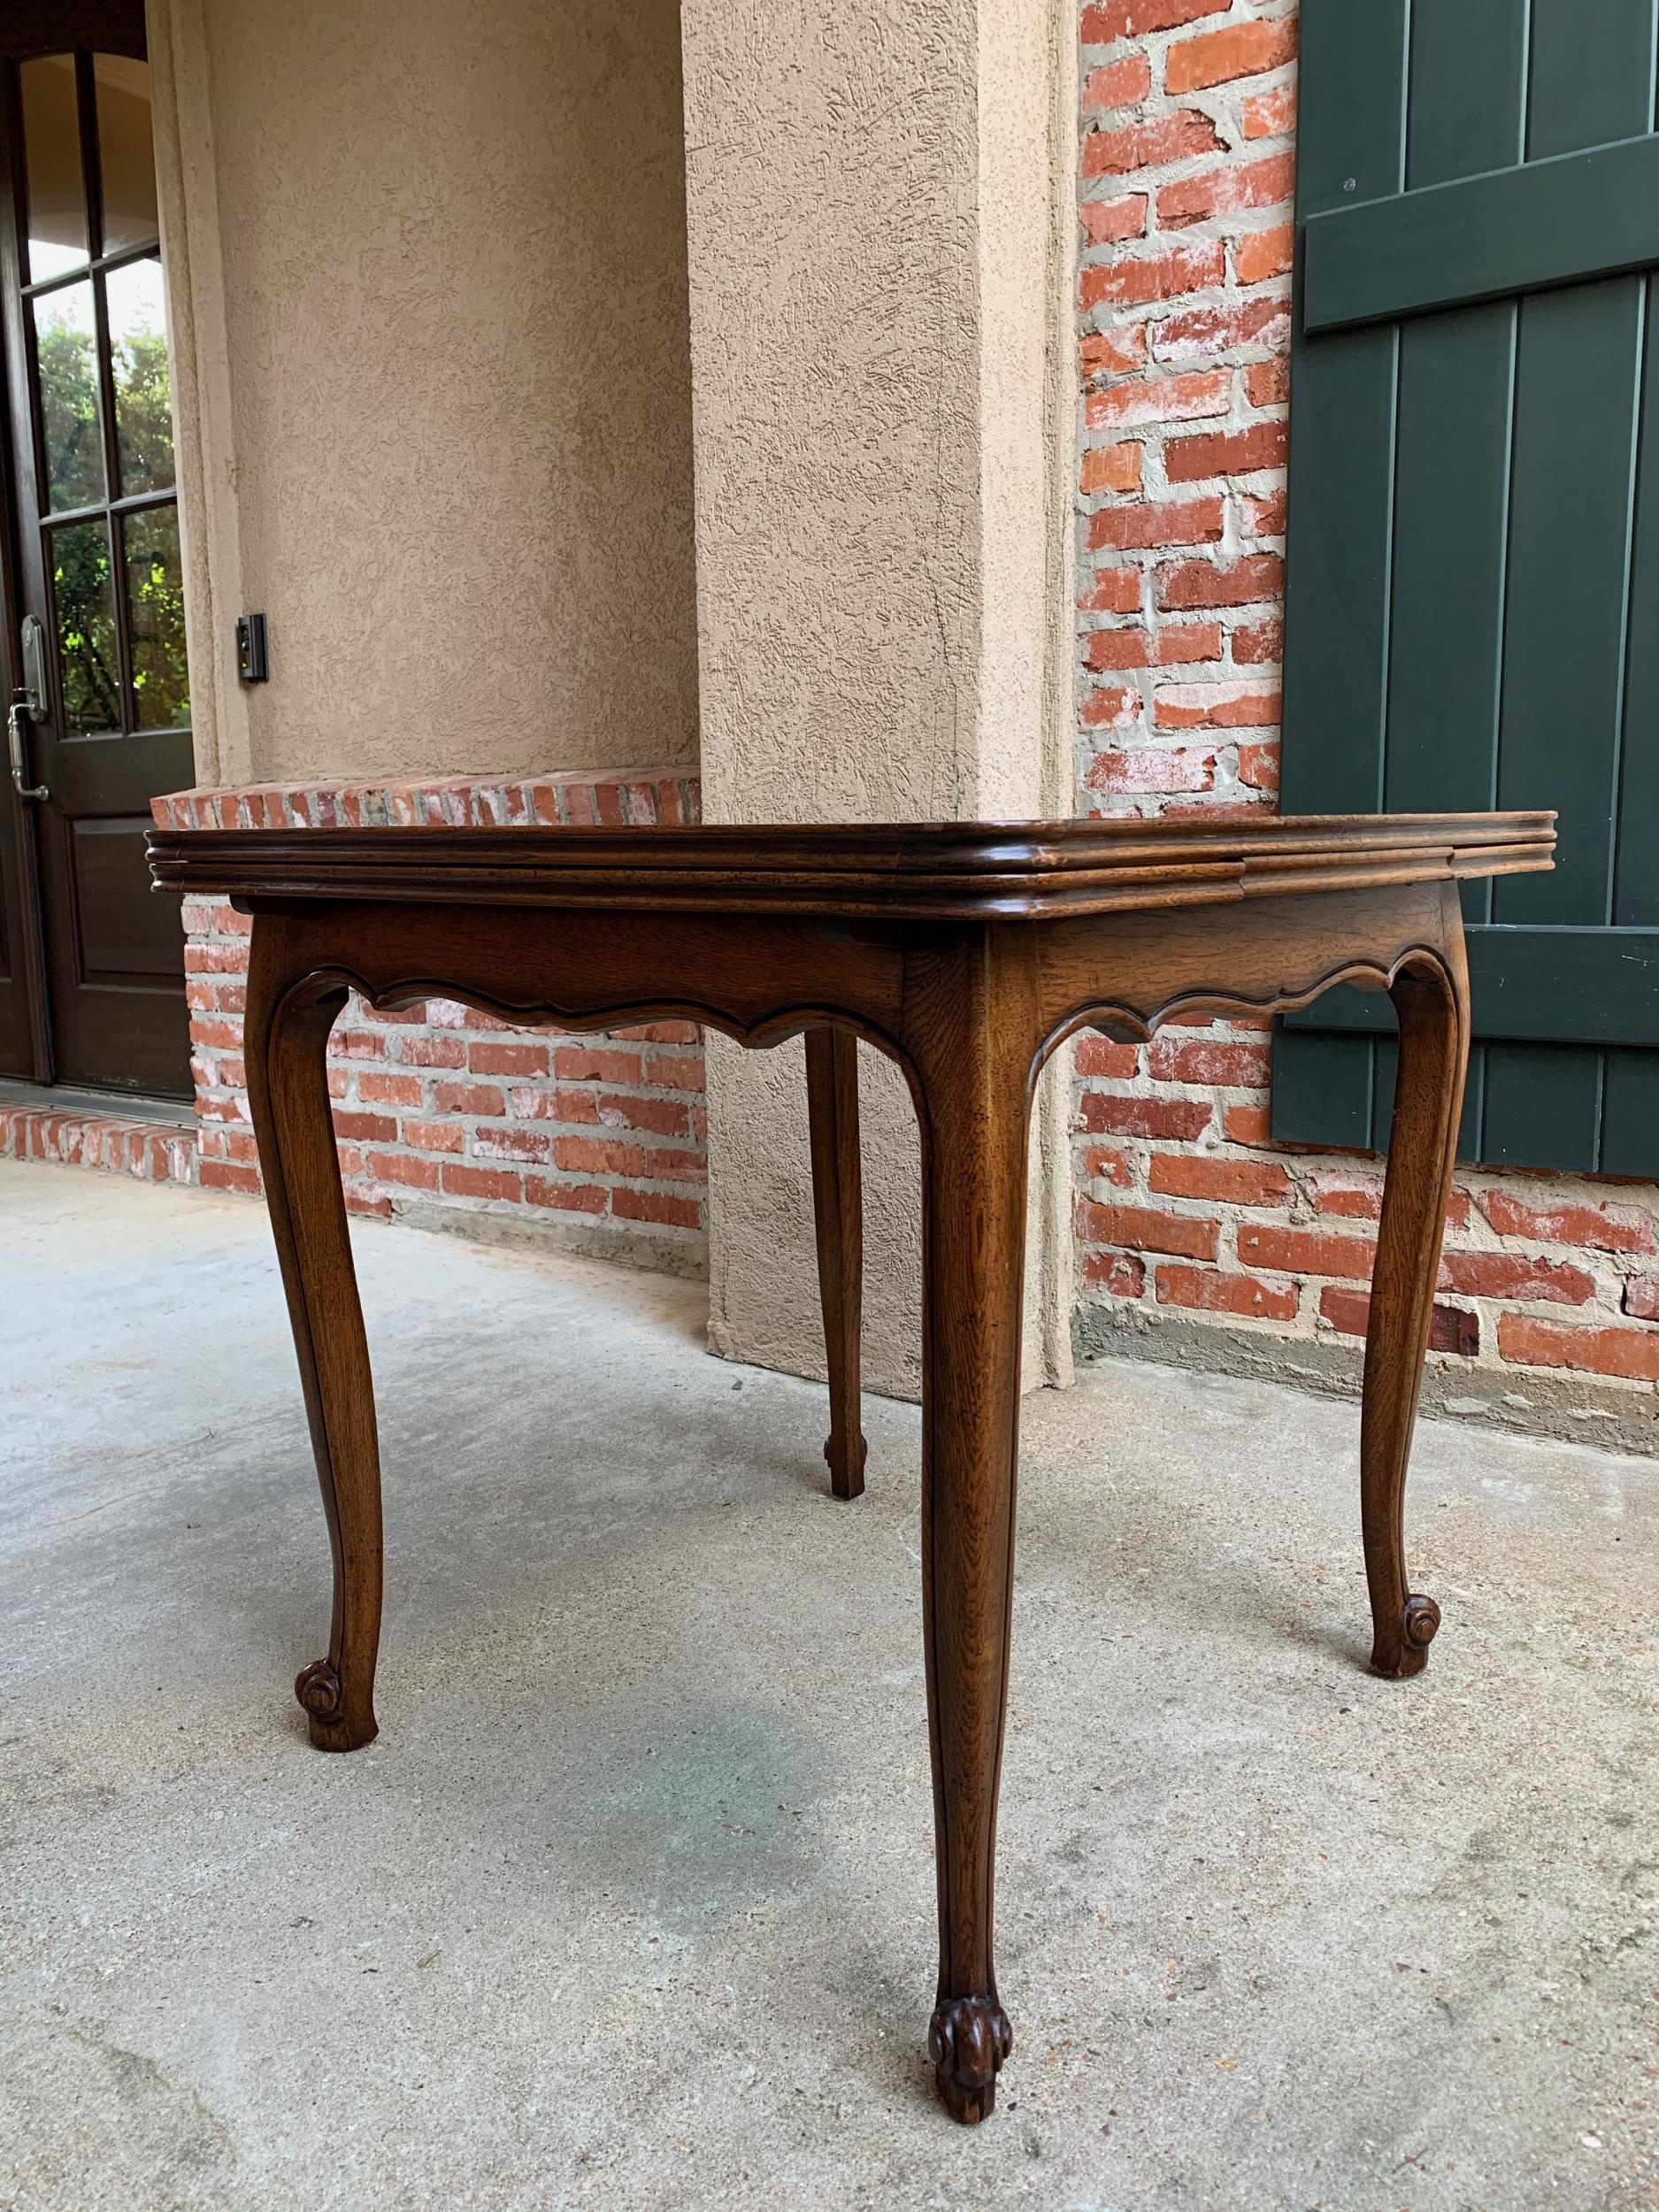 20th century French Country oak draw-leaf square table petite Louis XV style

~Direct from France~
~Lovely vintage French draw leaf table in a versatile small size, and expandable to 50”length when needed!~
~Square table tops have French